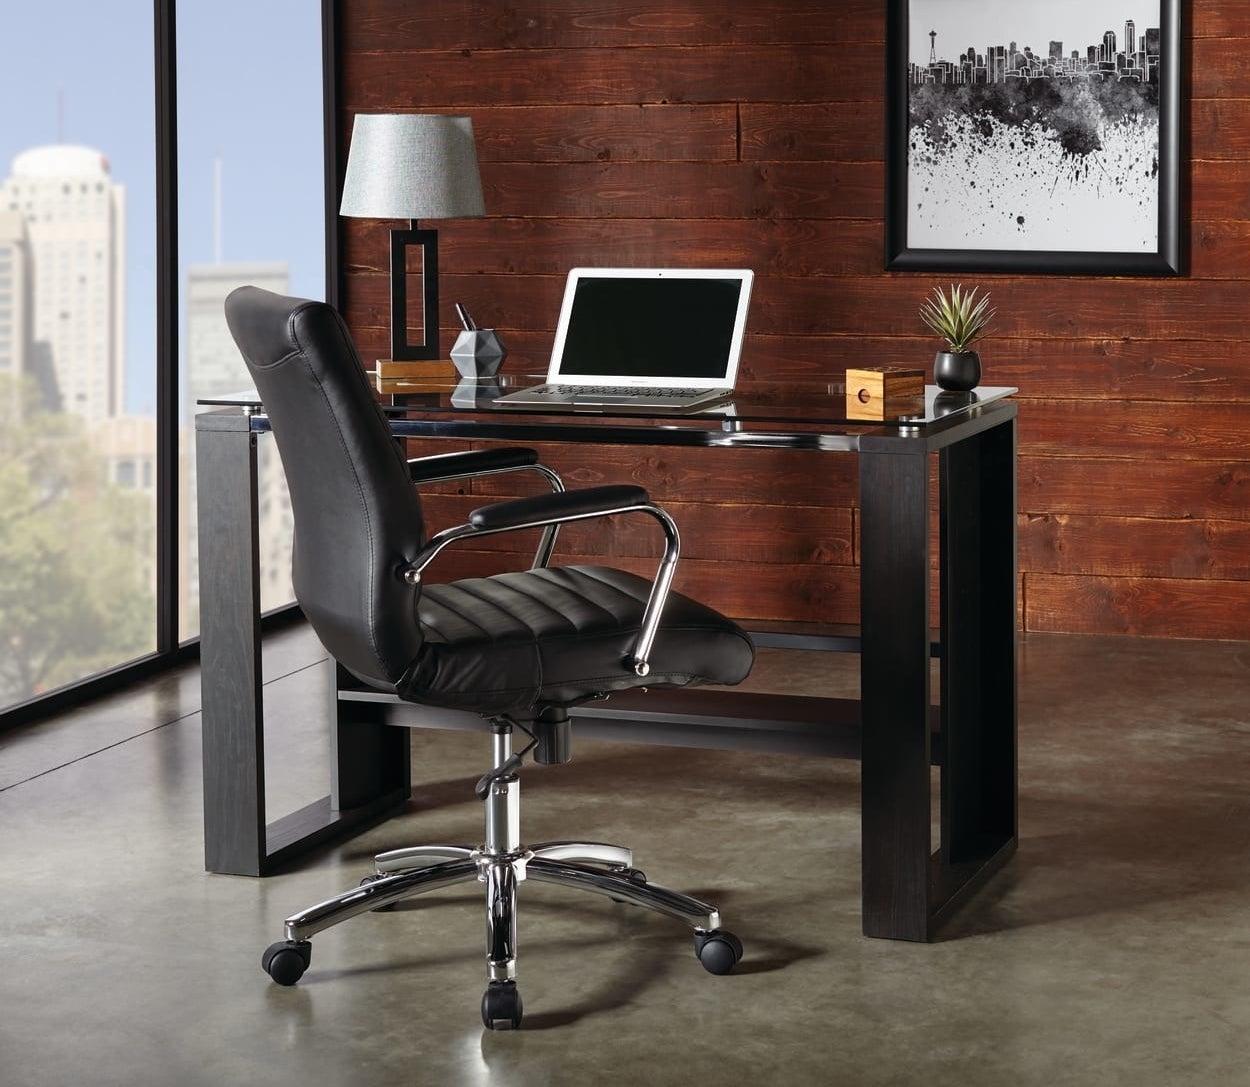 a black supportive office chair on wheels